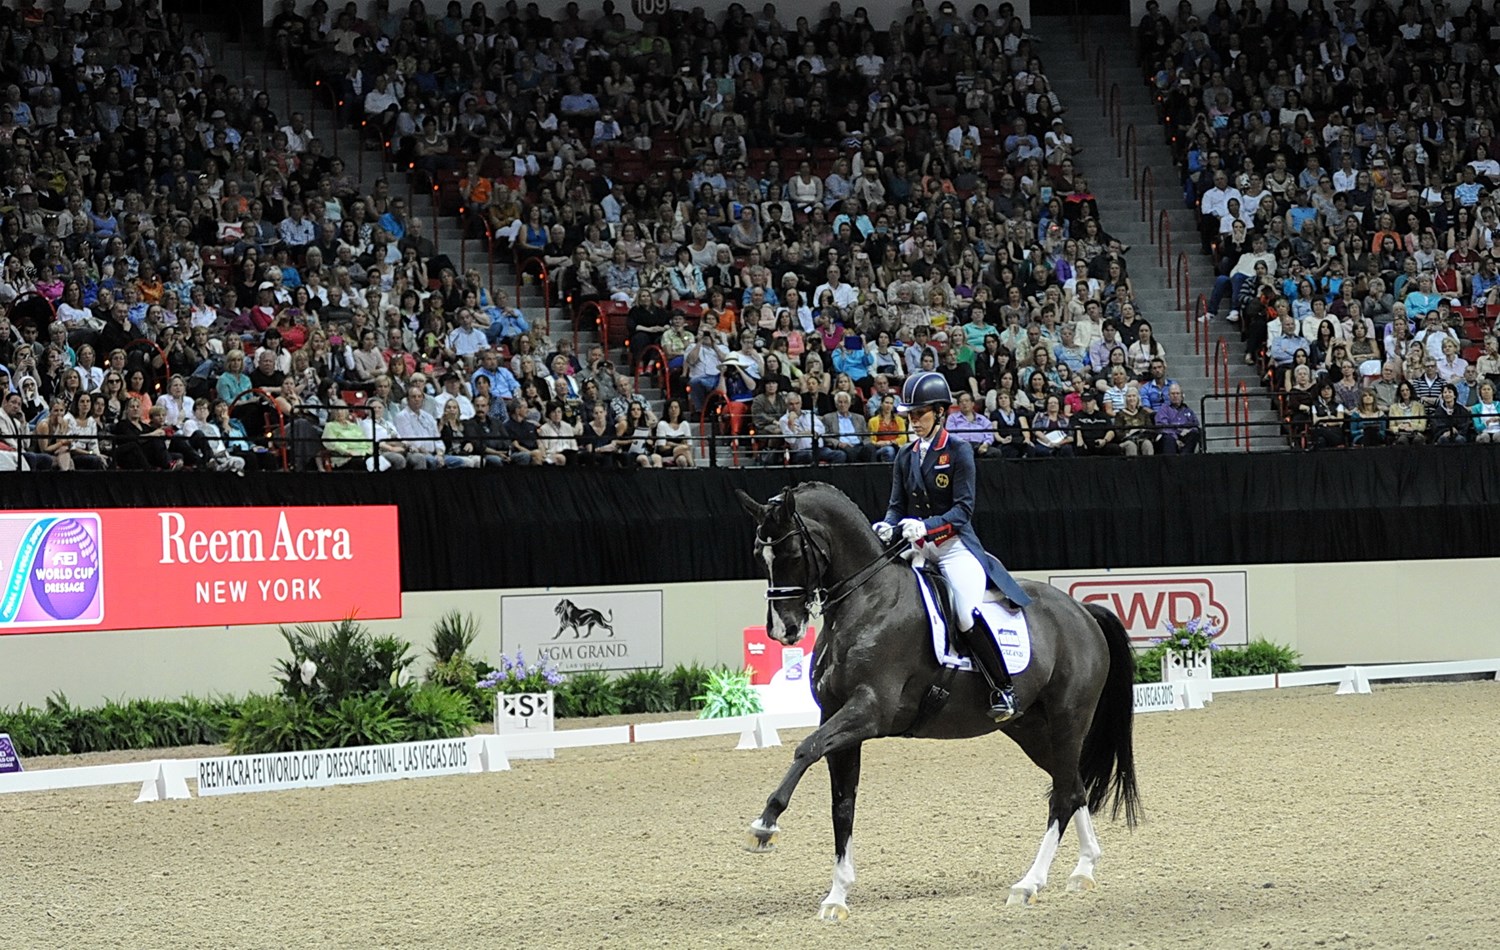 Exclusive: Vegas Could Be Out As 2018 FEI World Cup™ Venue